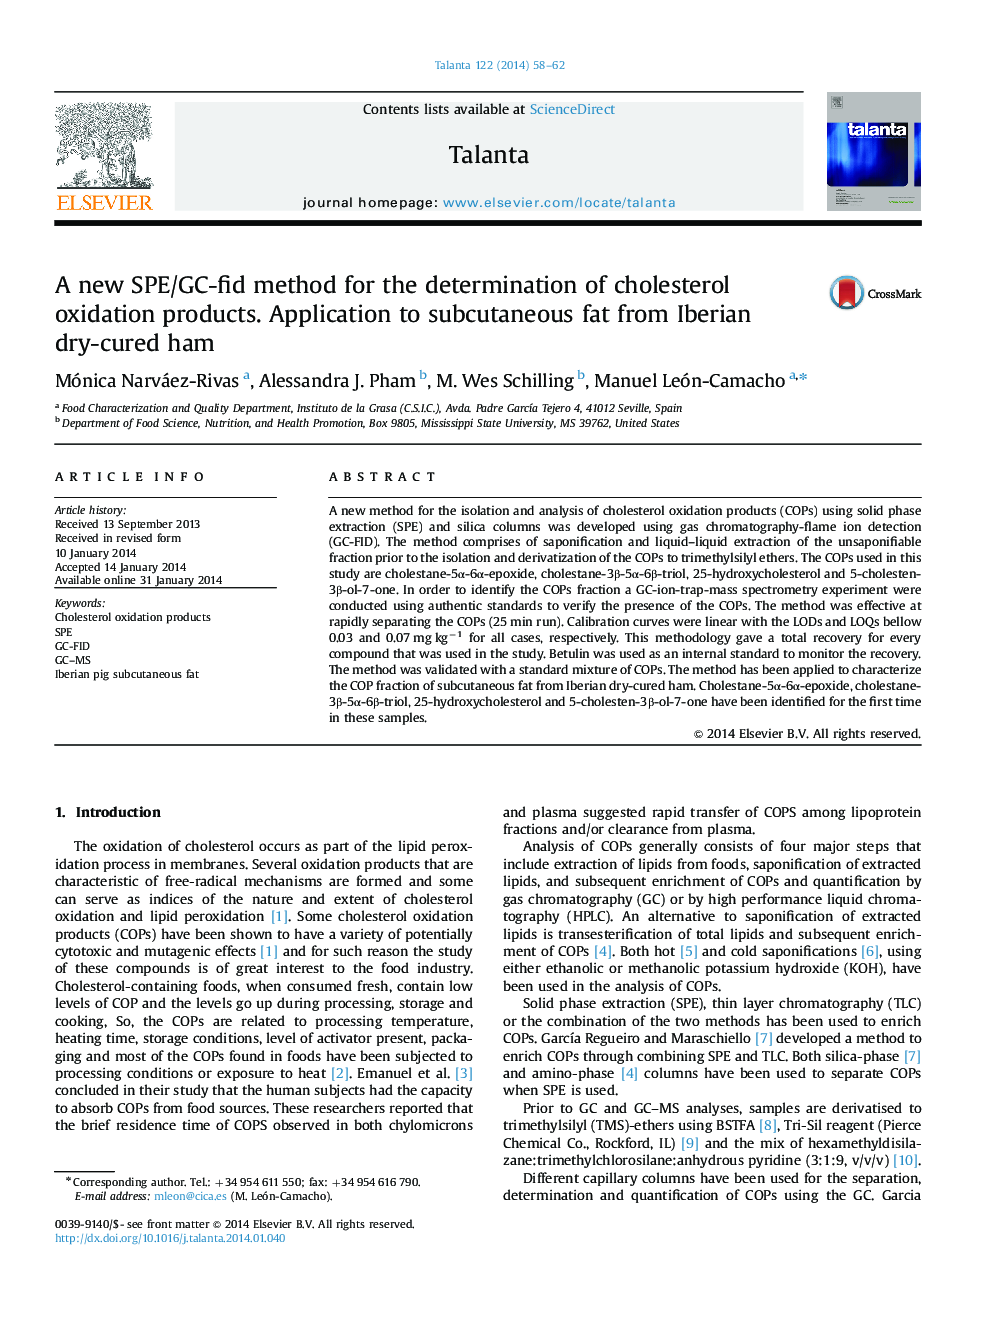 A new SPE/GC-fid method for the determination of cholesterol oxidation products. Application to subcutaneous fat from Iberian dry-cured ham